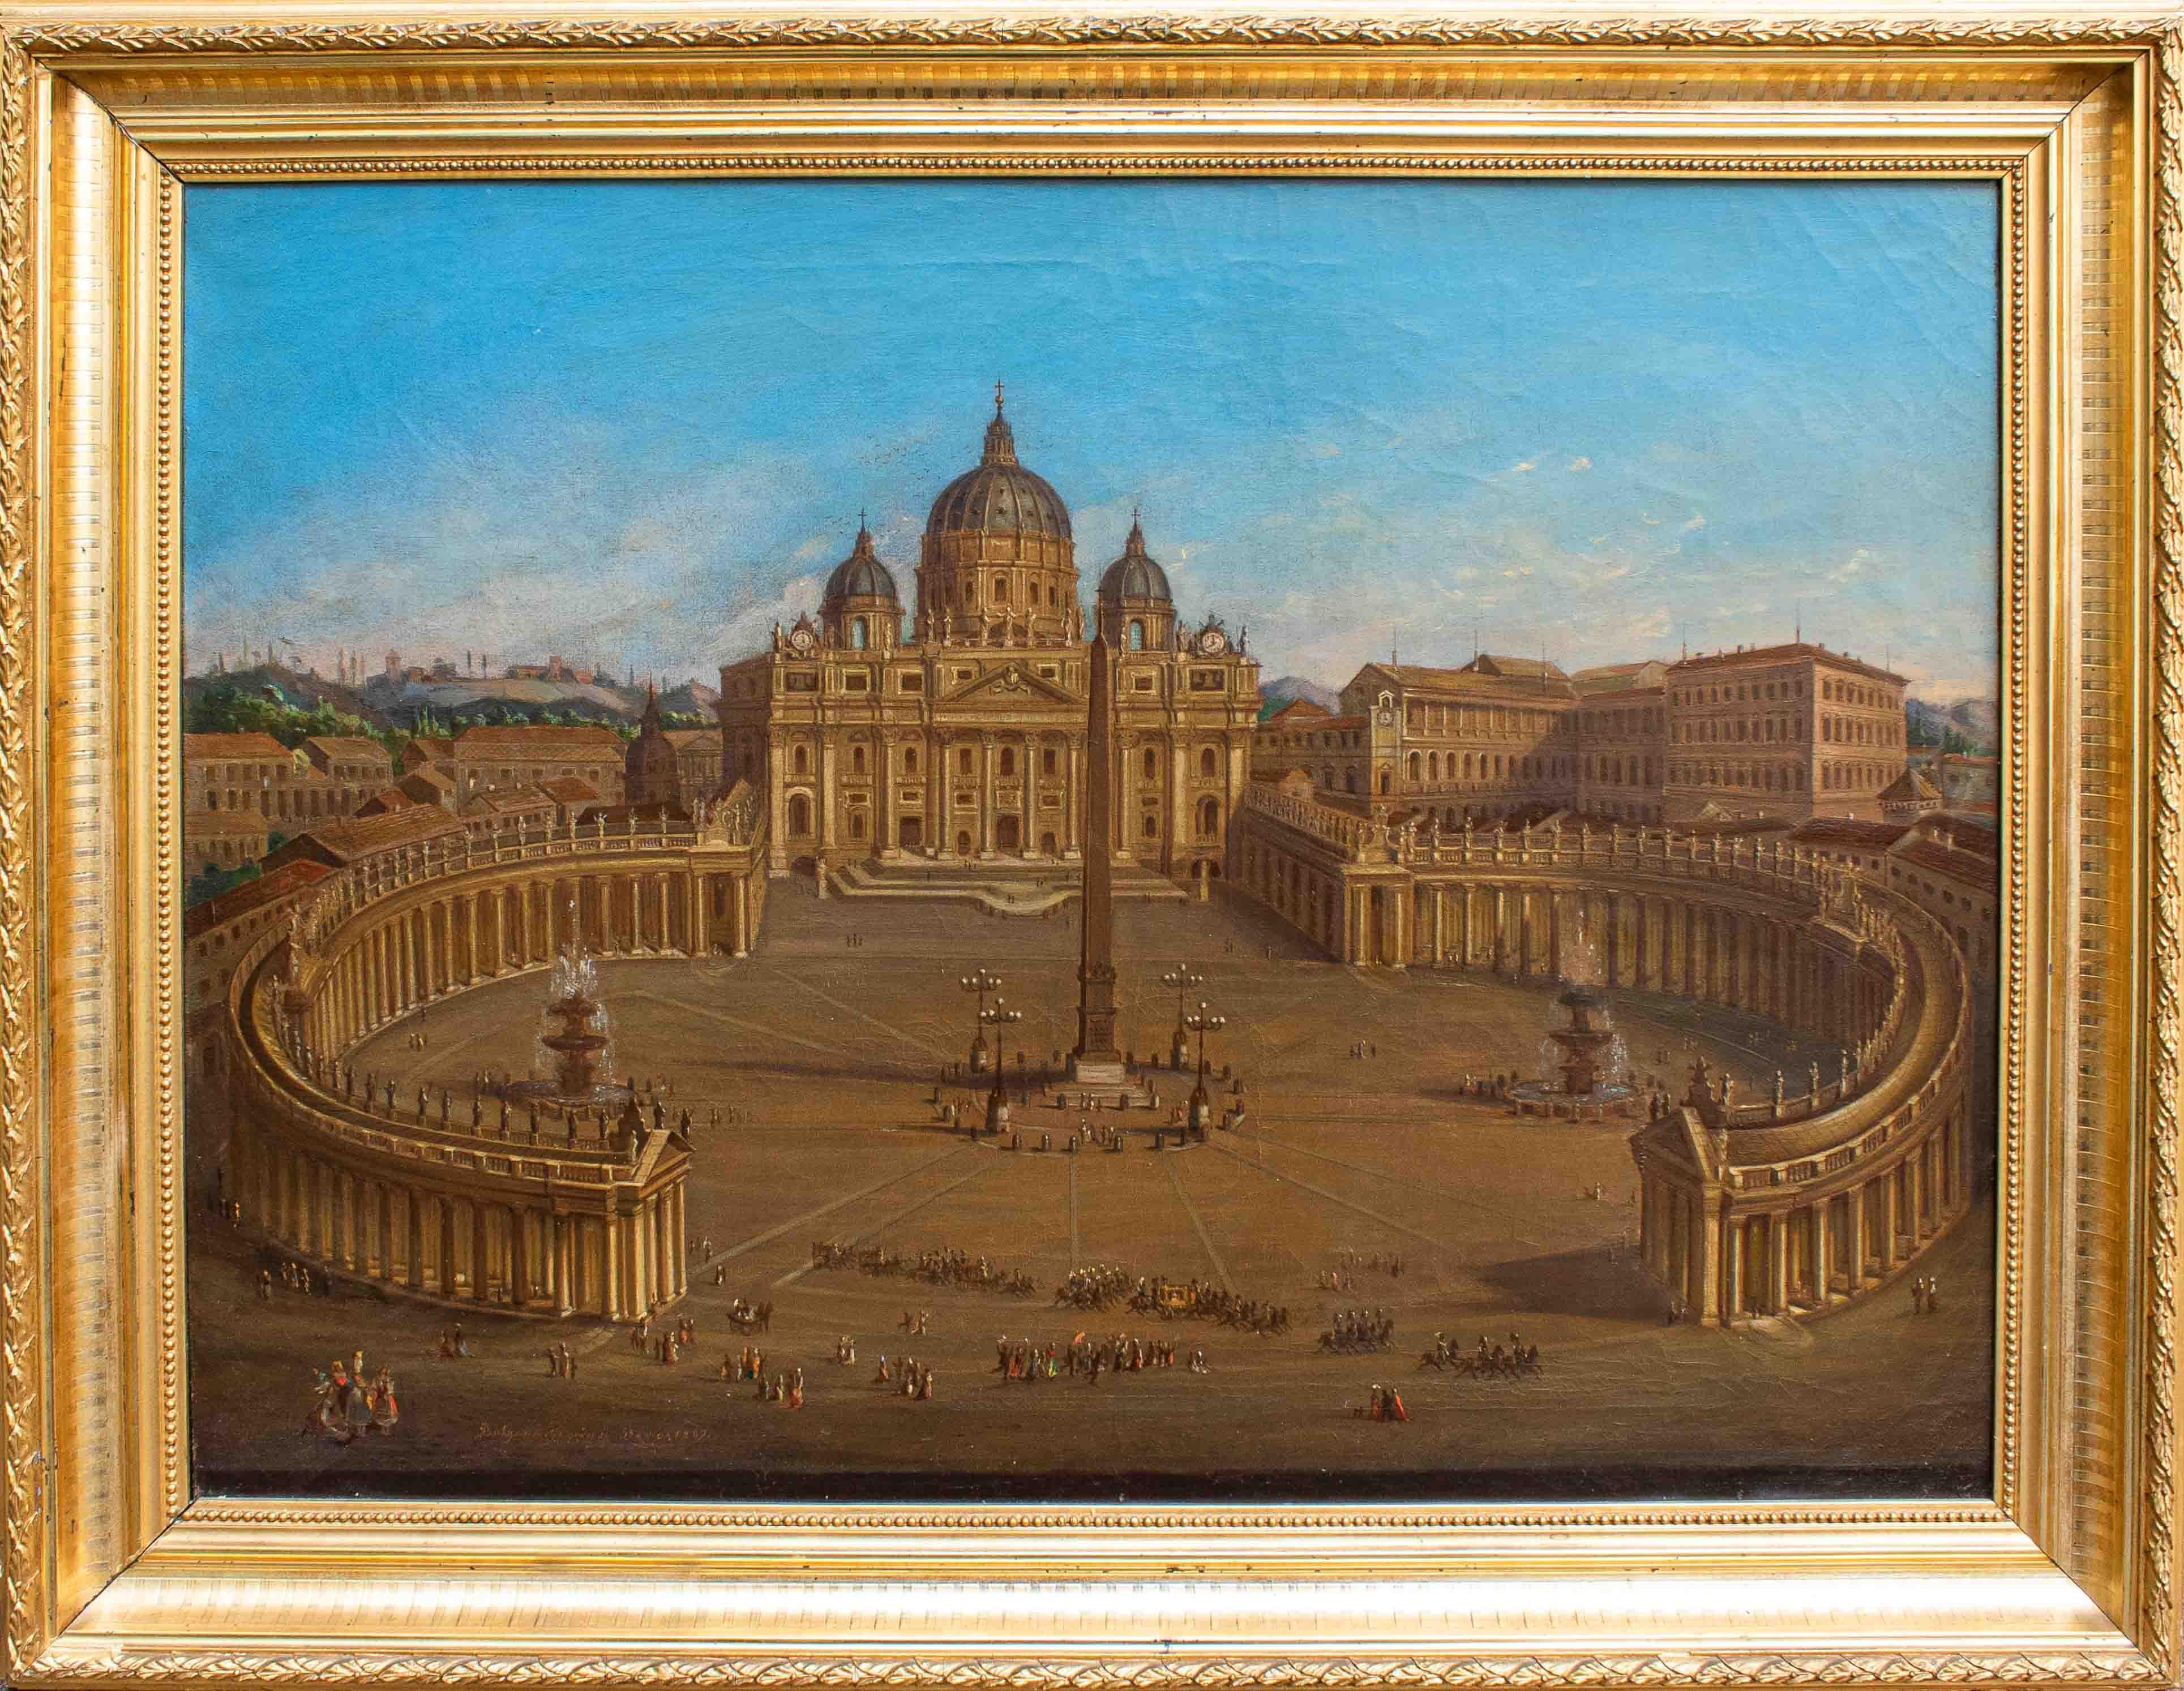 View of St. Peter's Basilica Oil painting on canvas by Joseph Bolzern